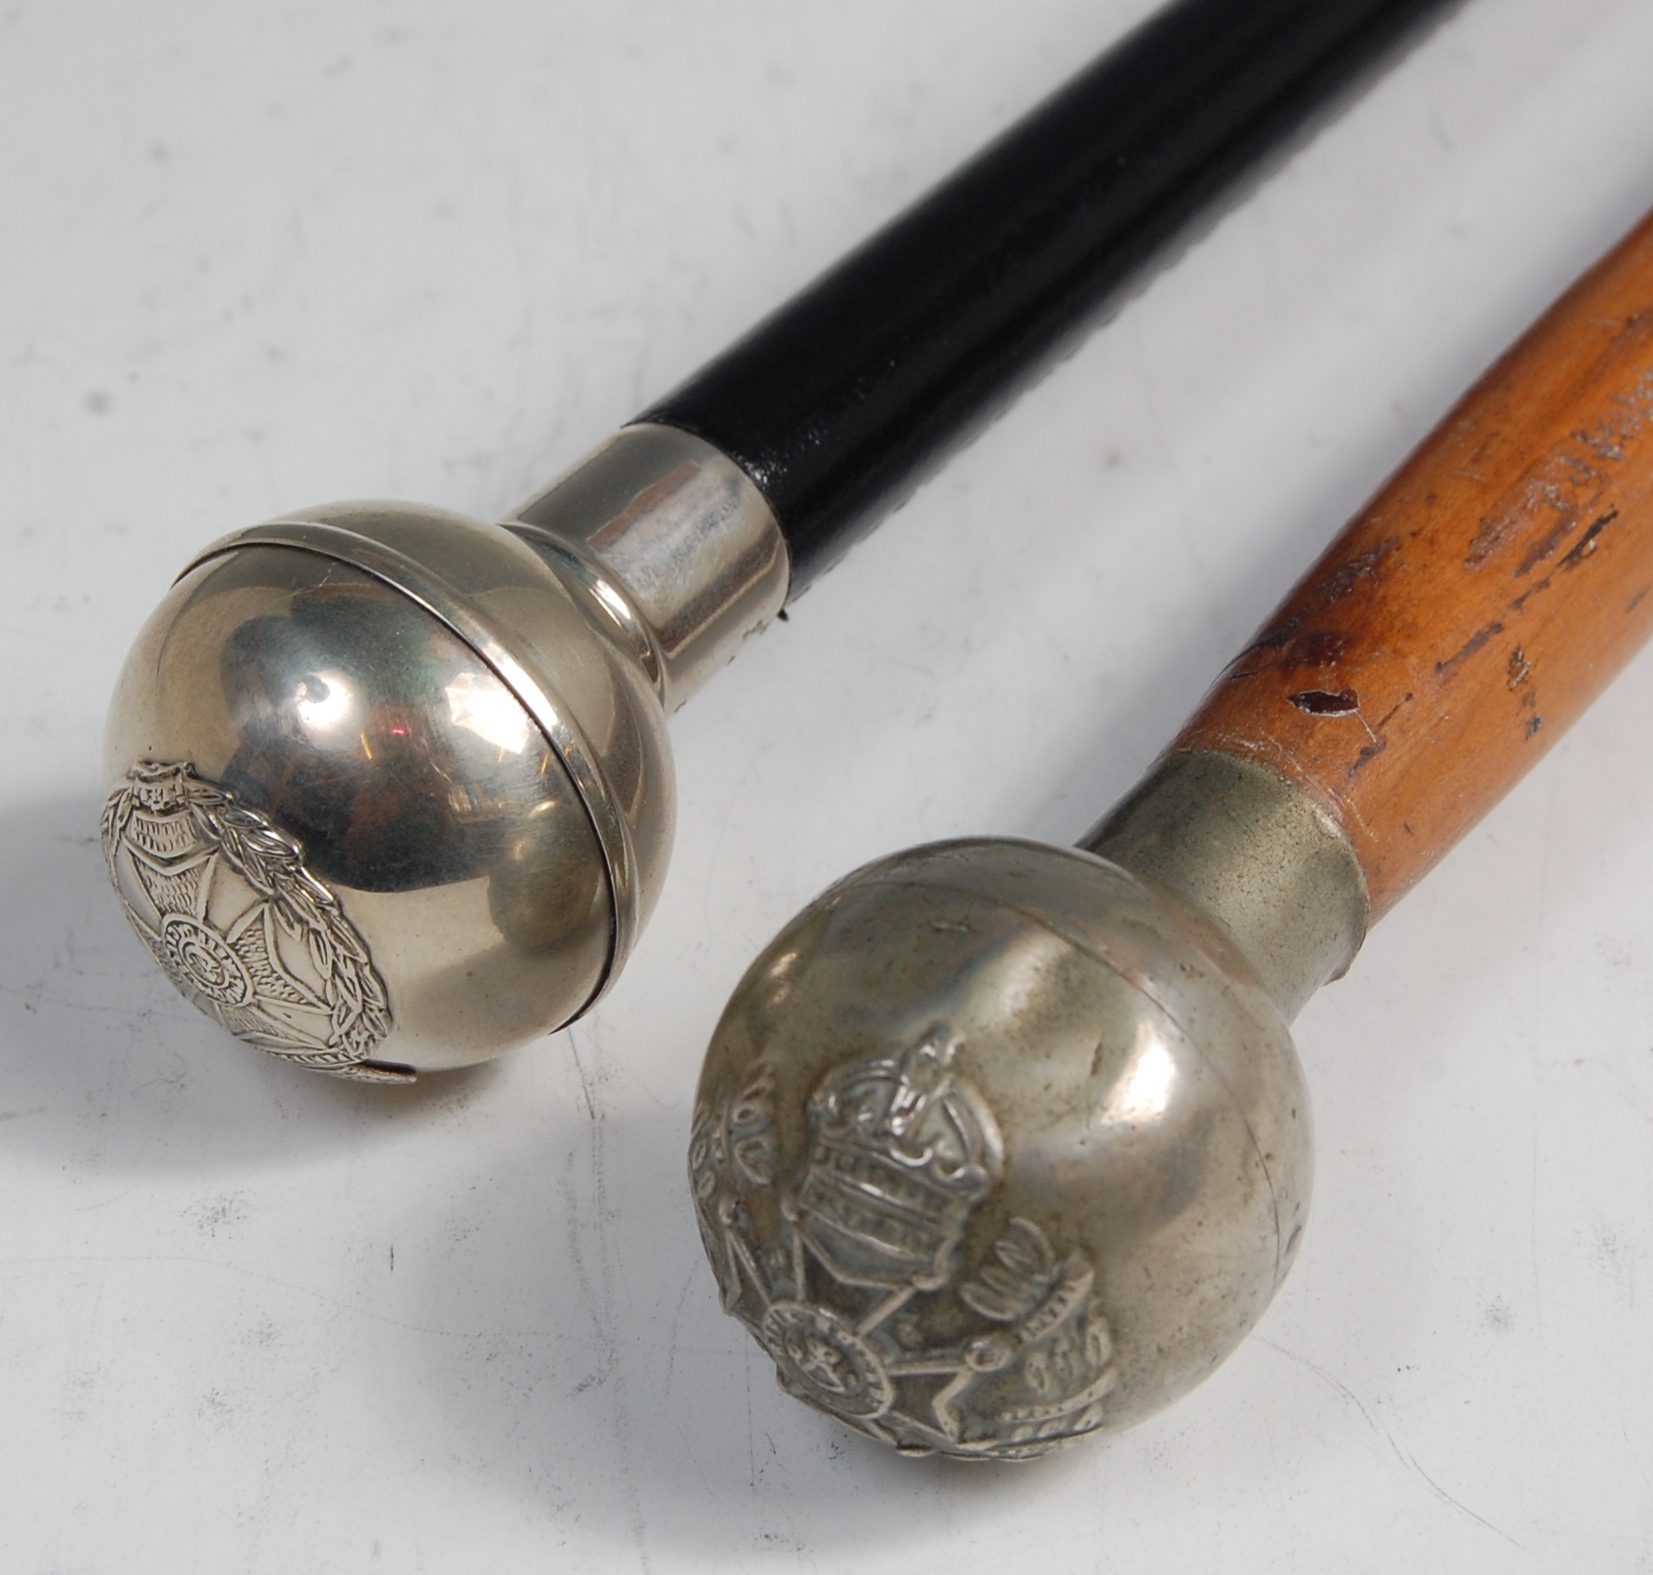 A Royal Green Jackets swagger stick having a leather covered shaft and plated terminal with